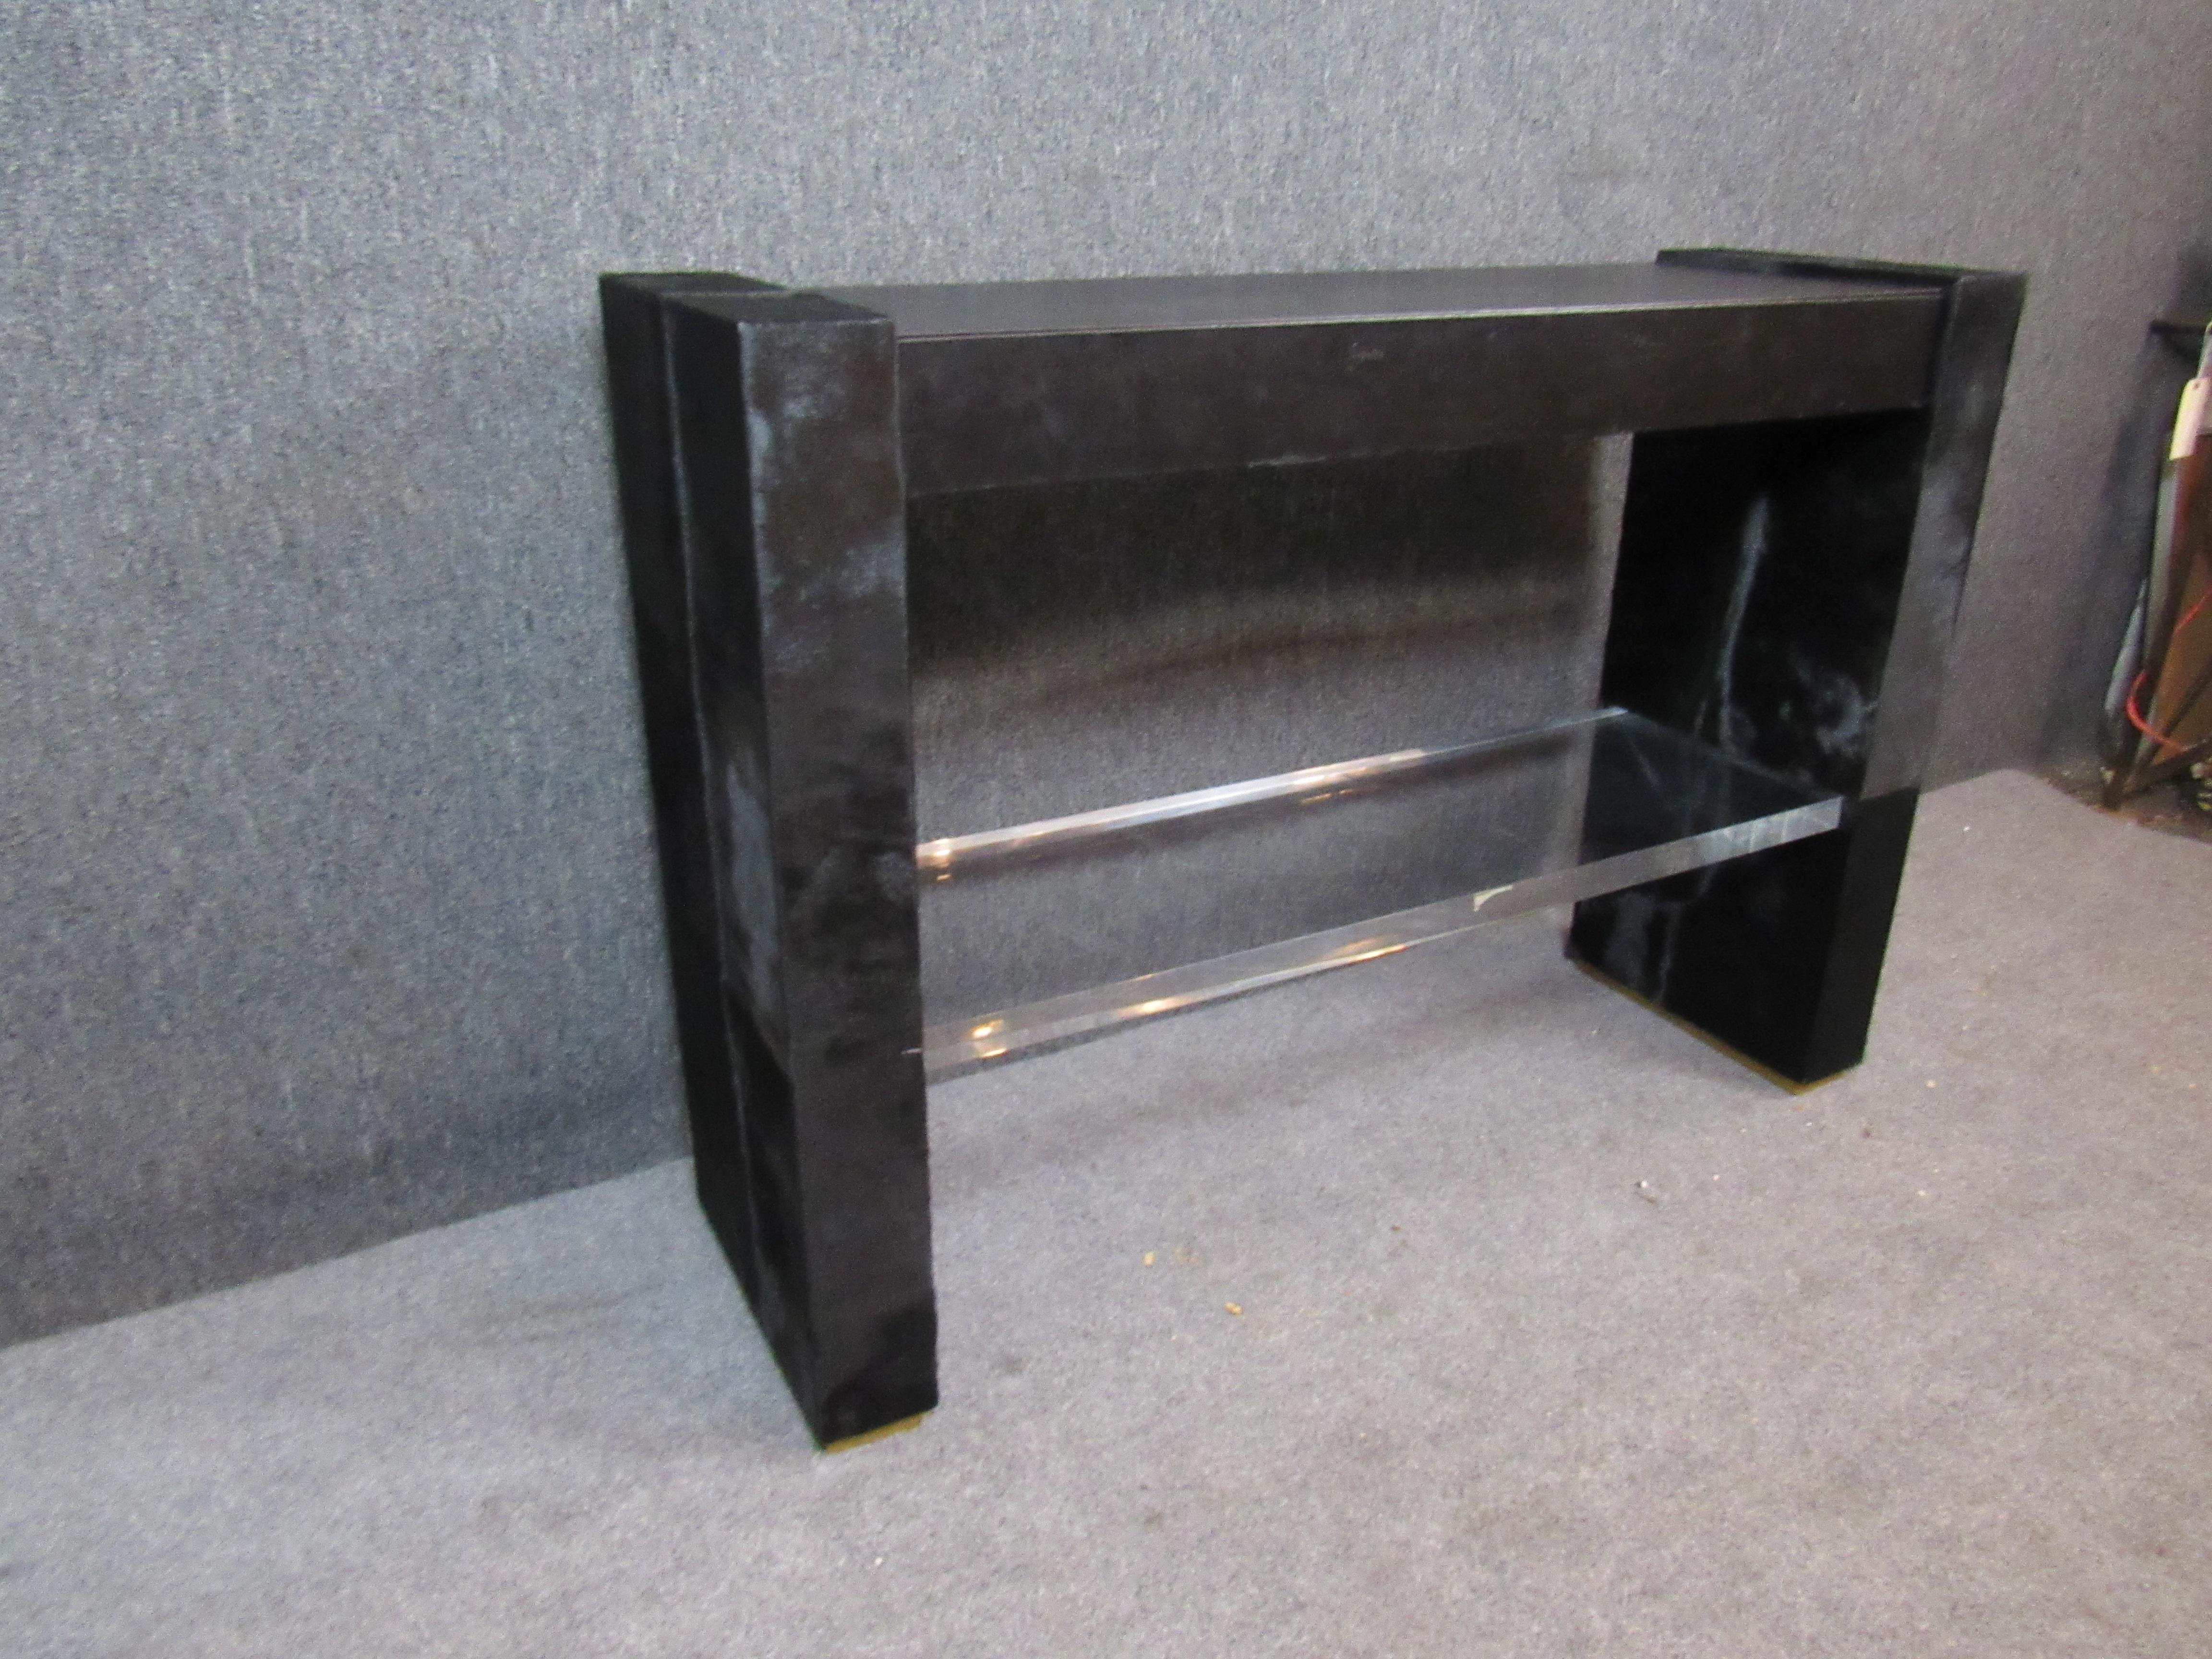 Absolutely unique post-modern console with a striking horsehide covering, leather & brass accents, and a crystal lucite shelf. A large pull-out drawer provides additional hidden storage, perfect as a hallway table or even a narrow desk. The black